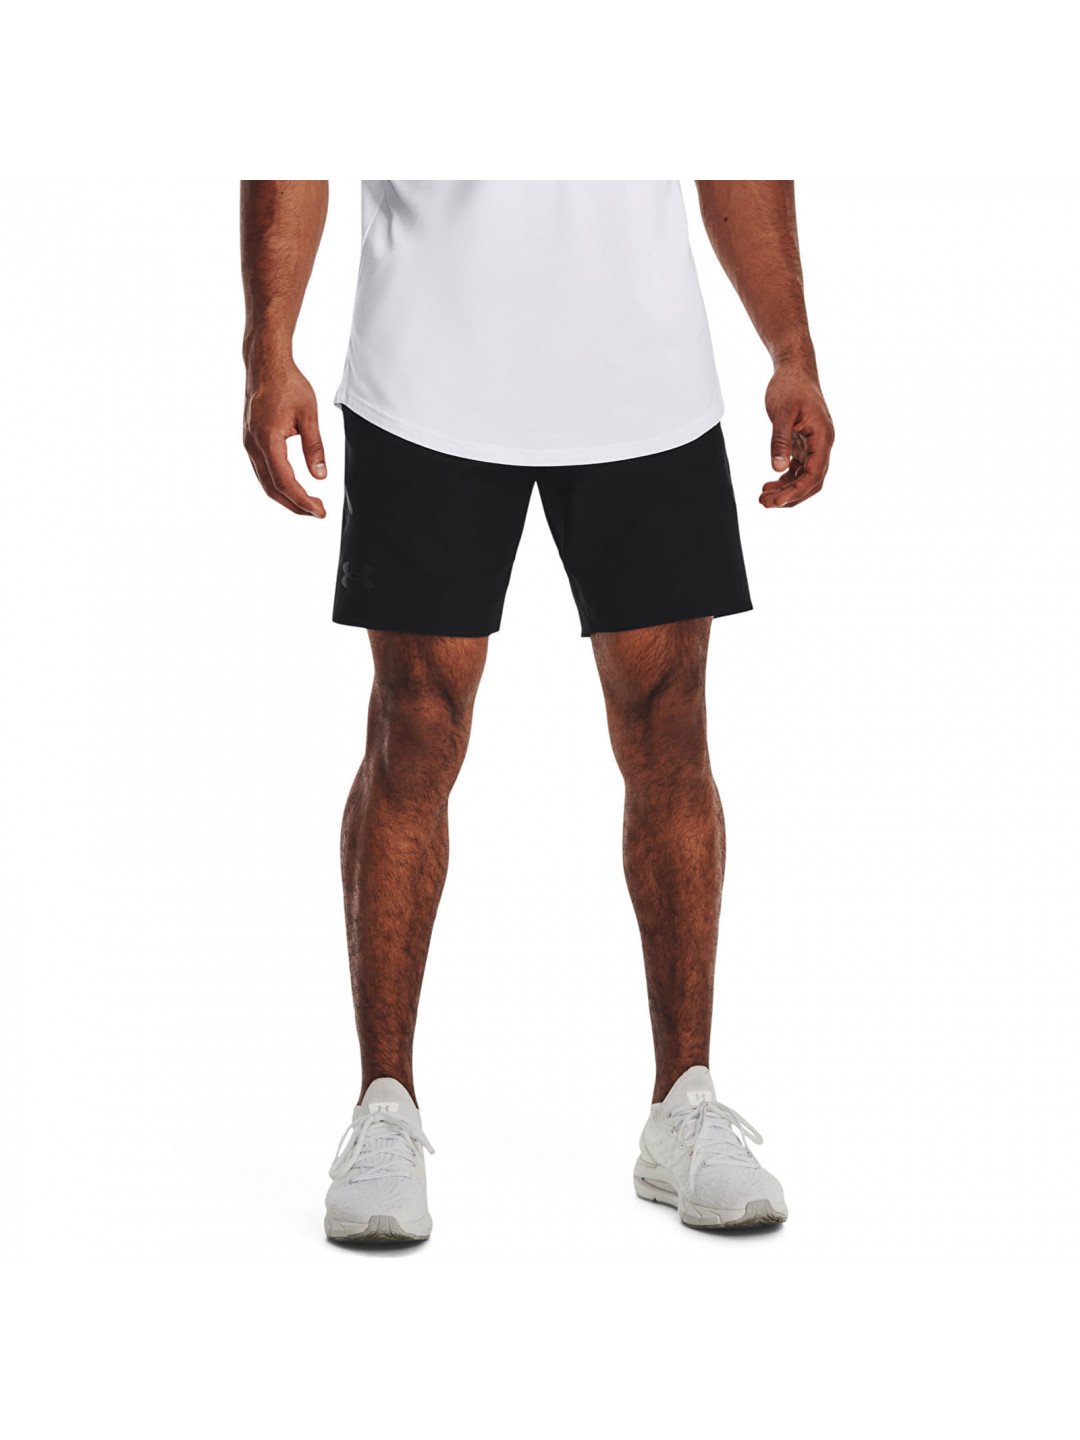 Under Armour Unstoppable Shorts Black